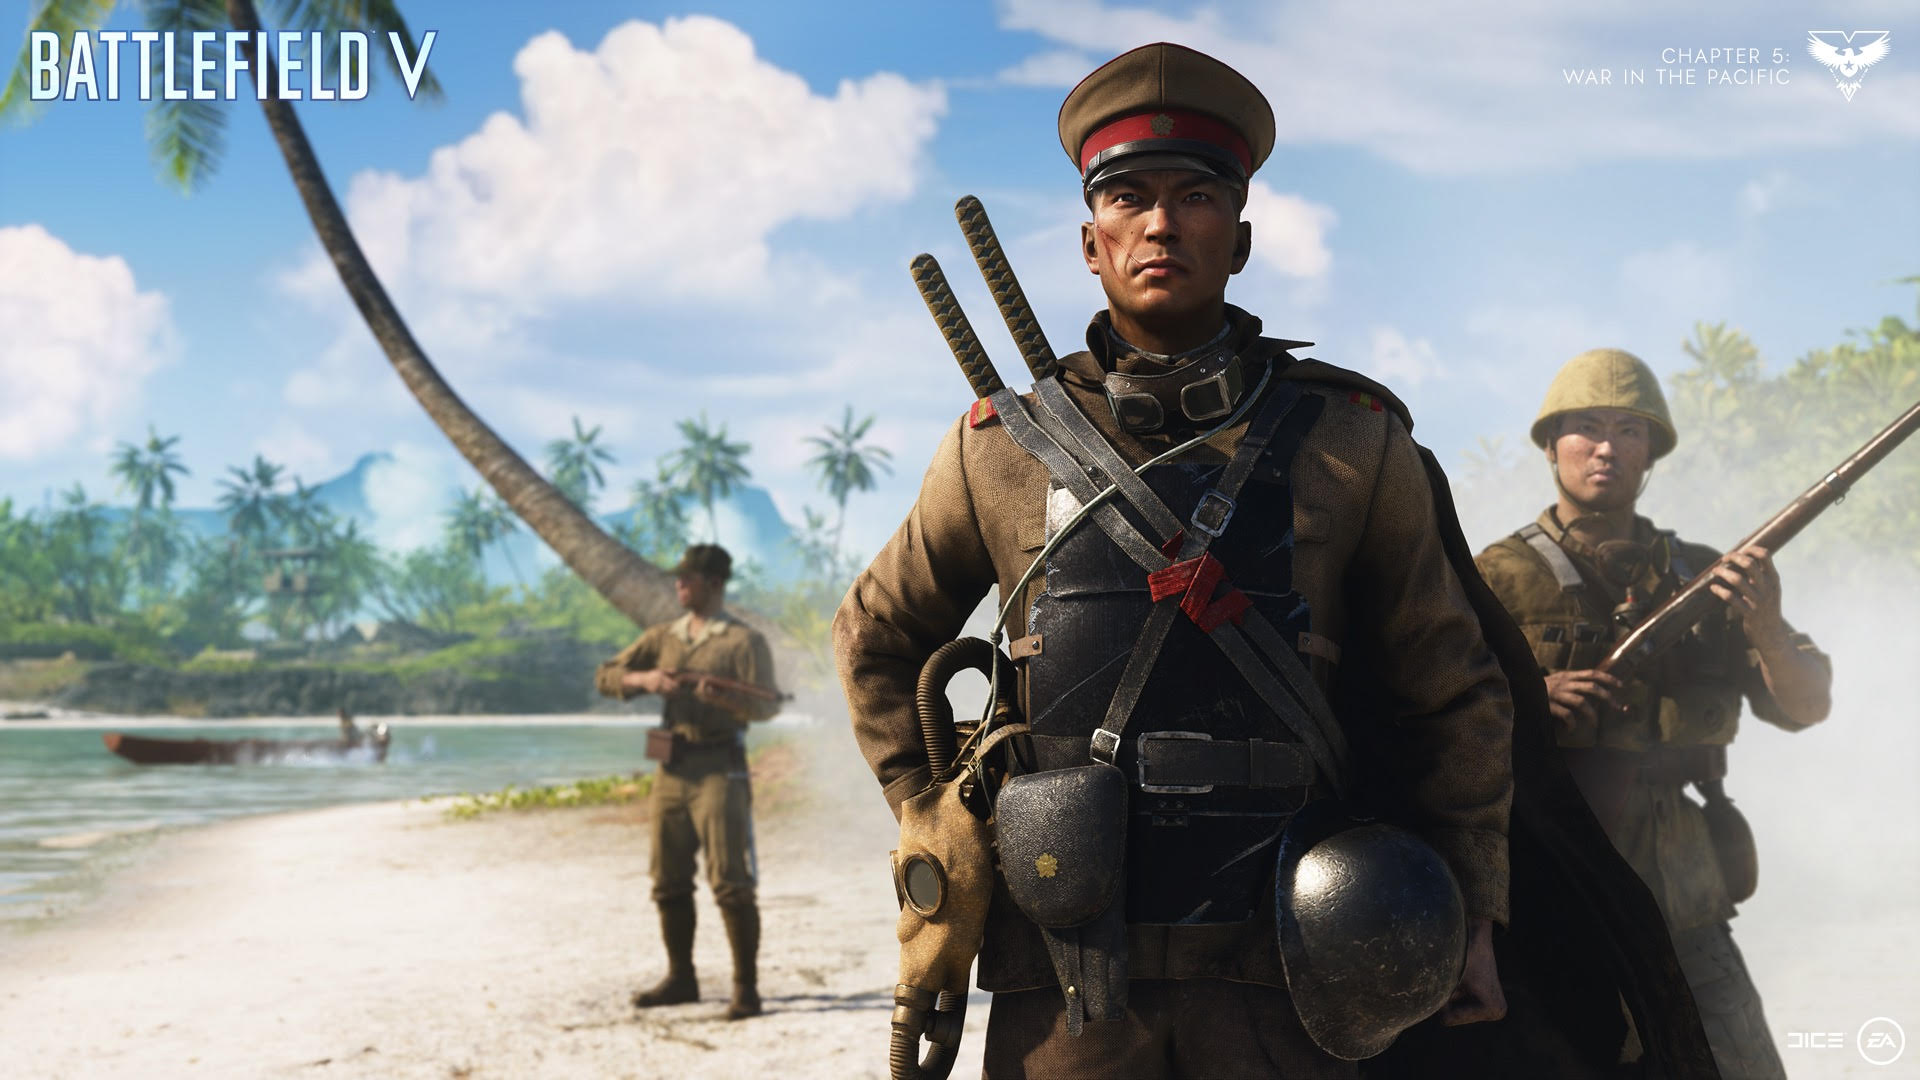 Image for Battlefield 5 is getting custom servers next week, though not without a few missing features